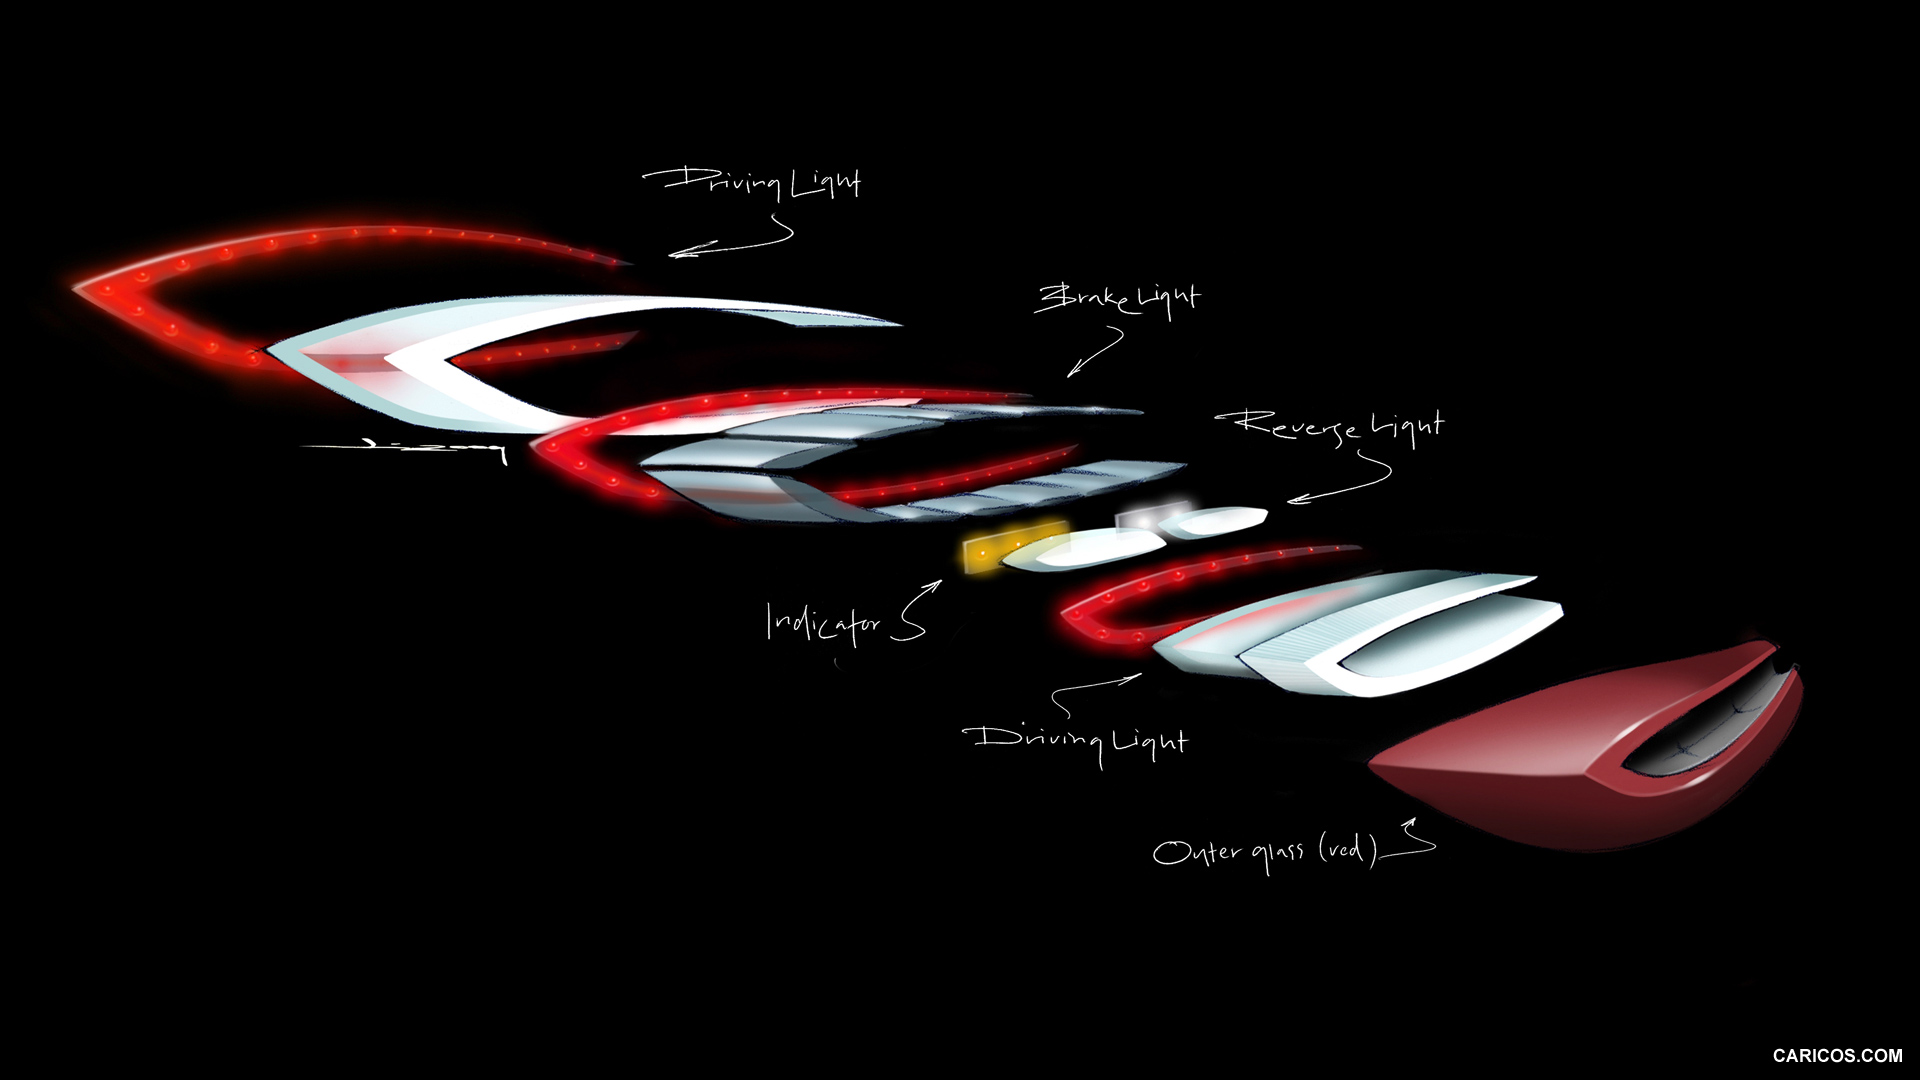 Mercedes-Benz F800 Style Concept (2010)  - Design Sketch, #120 of 120